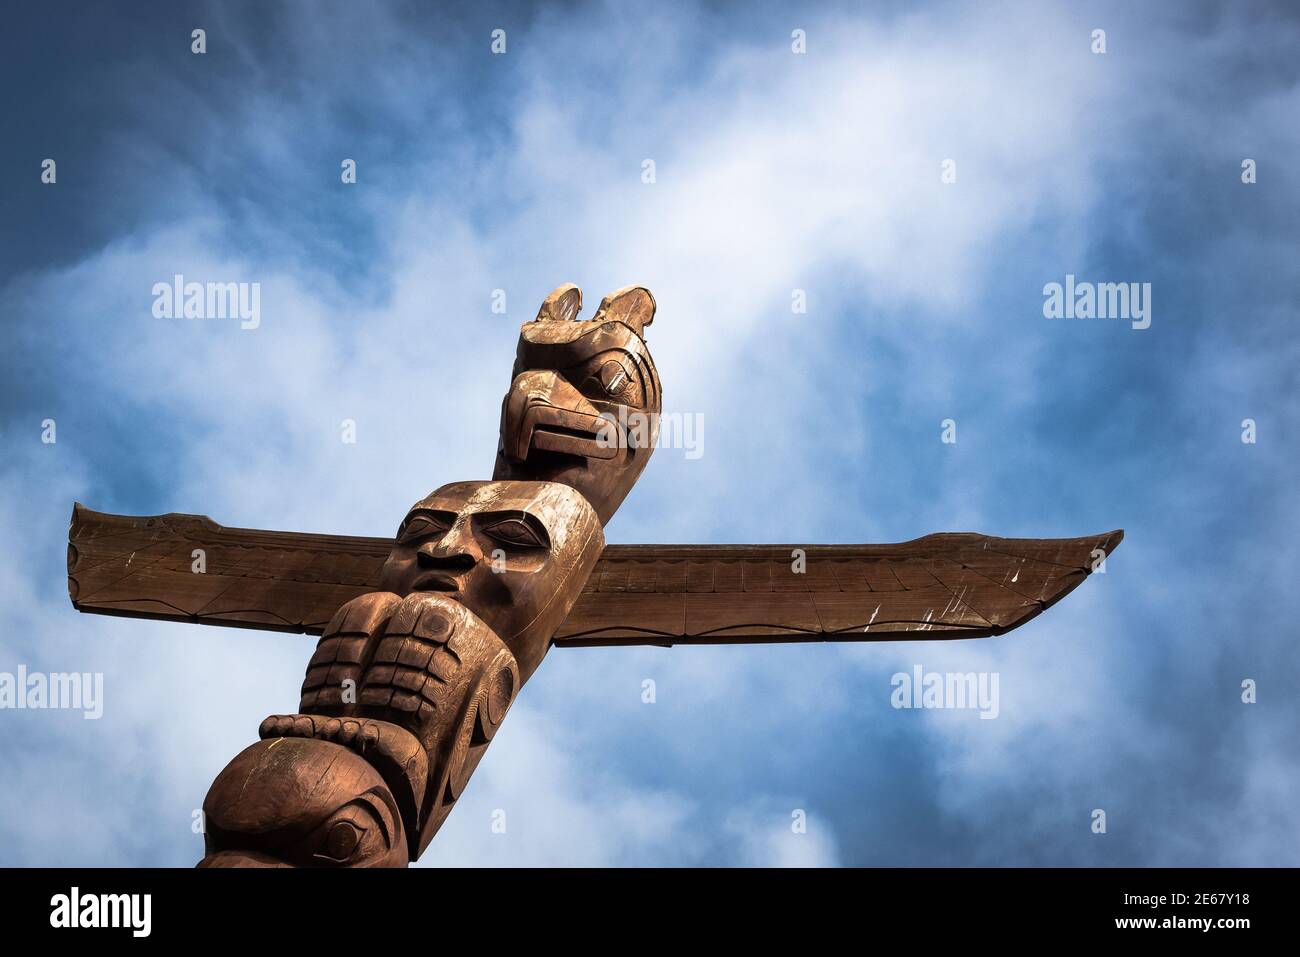 Totem poles in Vancouver's Stanley Park, British Columbia, Canada Stock Photo